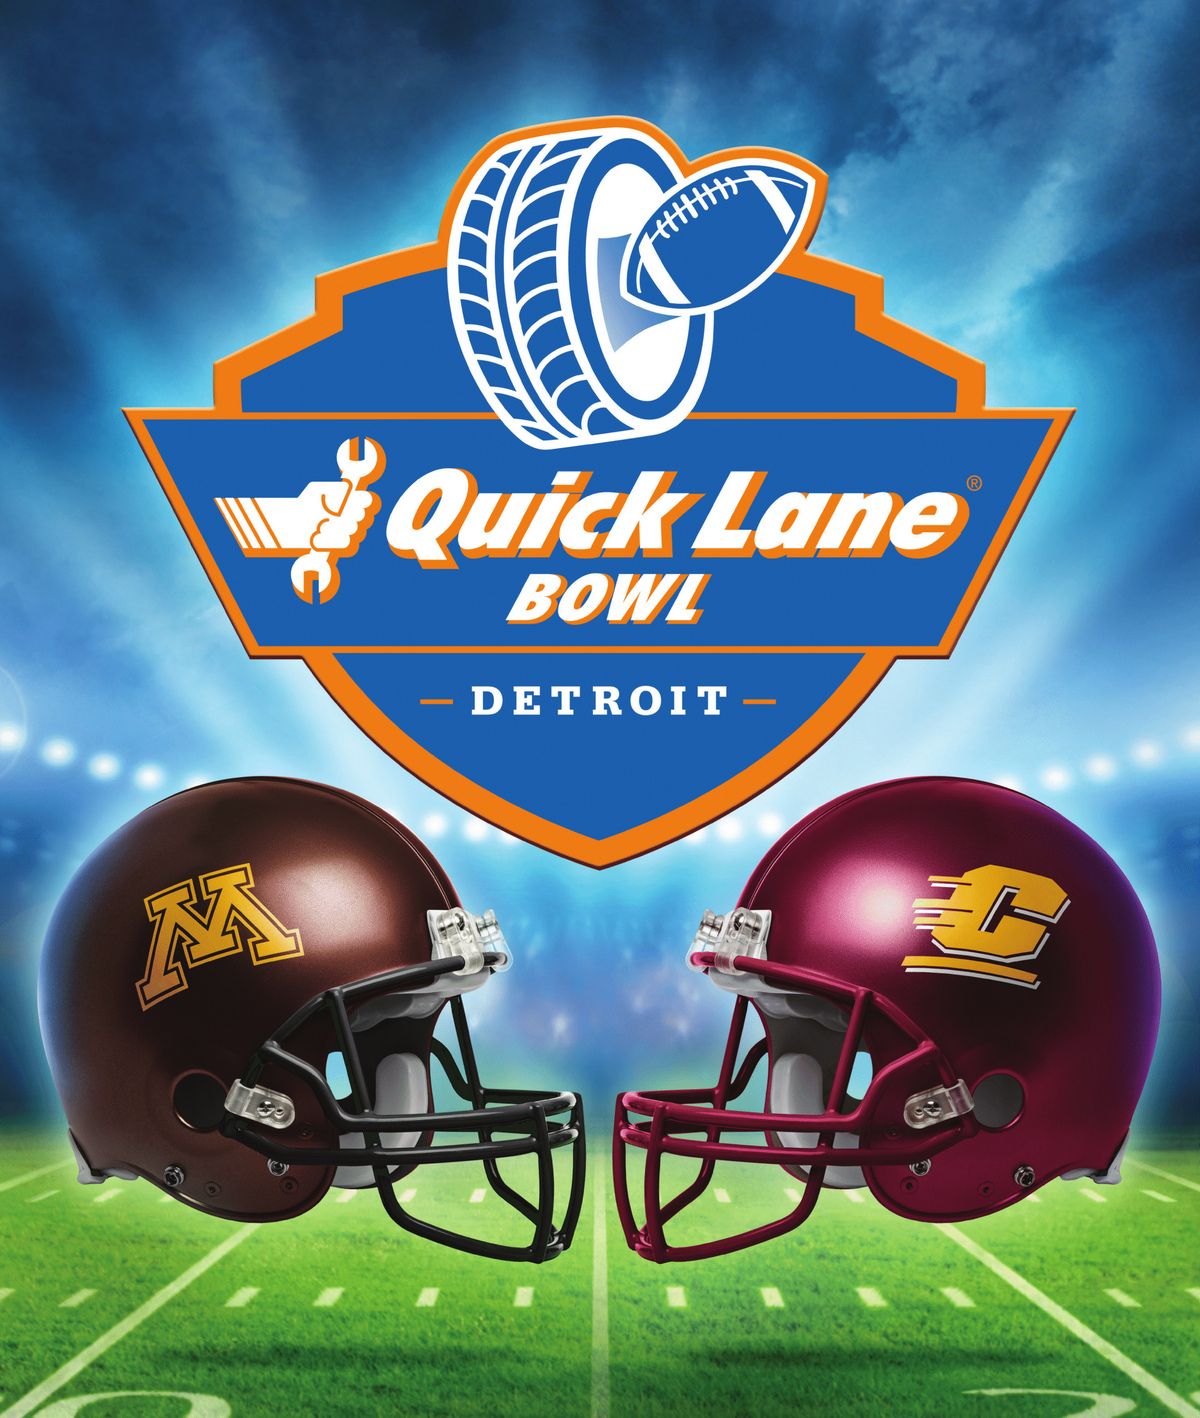 Minnesota and Central Michigan to play in 2015 Quick Lane Bowl © Ford Motor Company